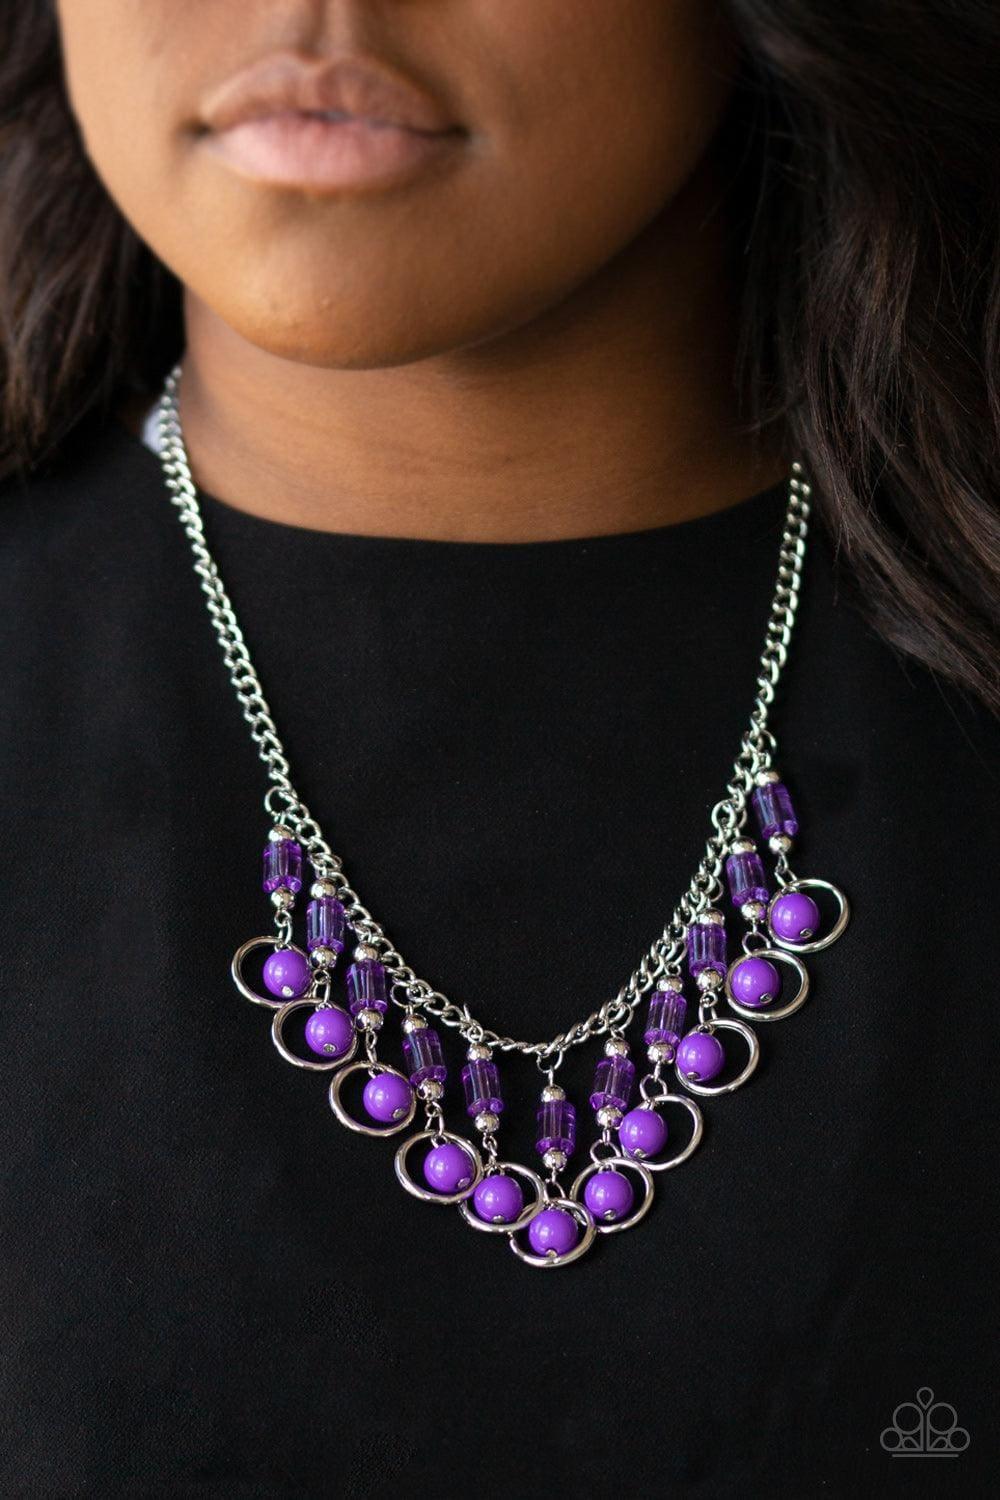 Paparazzi Accessories - Cool Cascade - Purple Necklace - Bling by JessieK